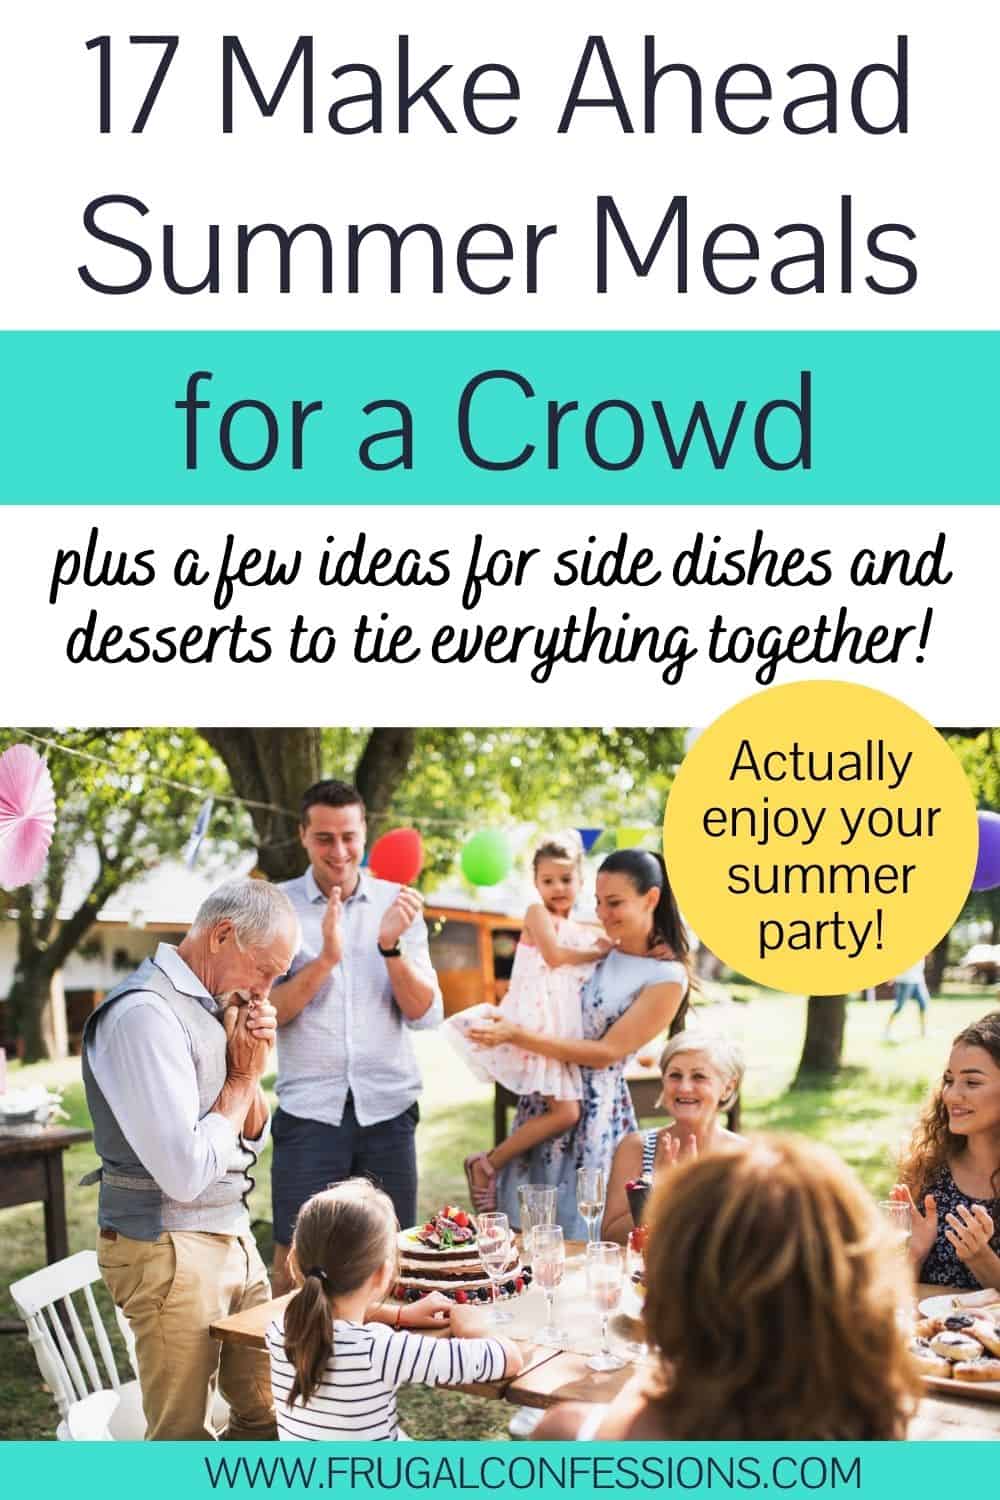 summer party out in backyard, text overlay "17 make ahead summer meals for a crowd"